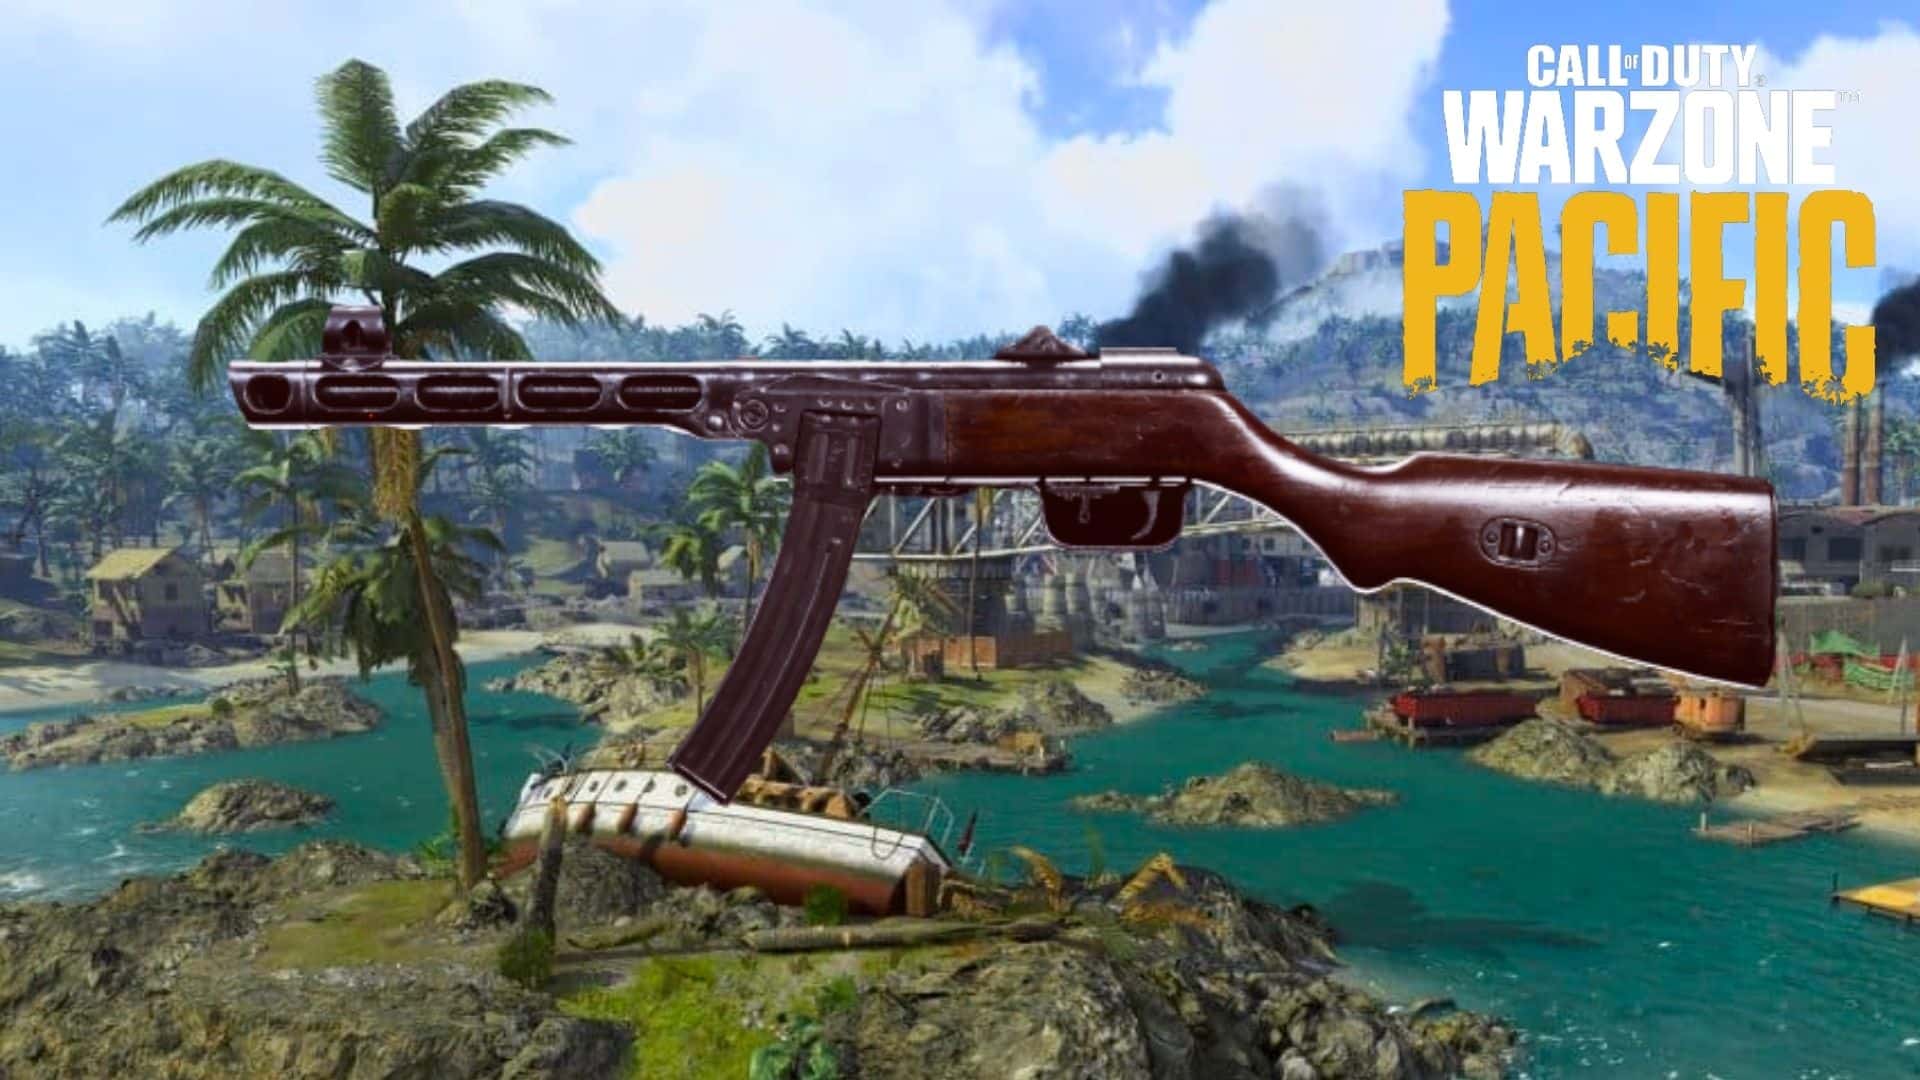 PPSH in Warzone on Caldera map